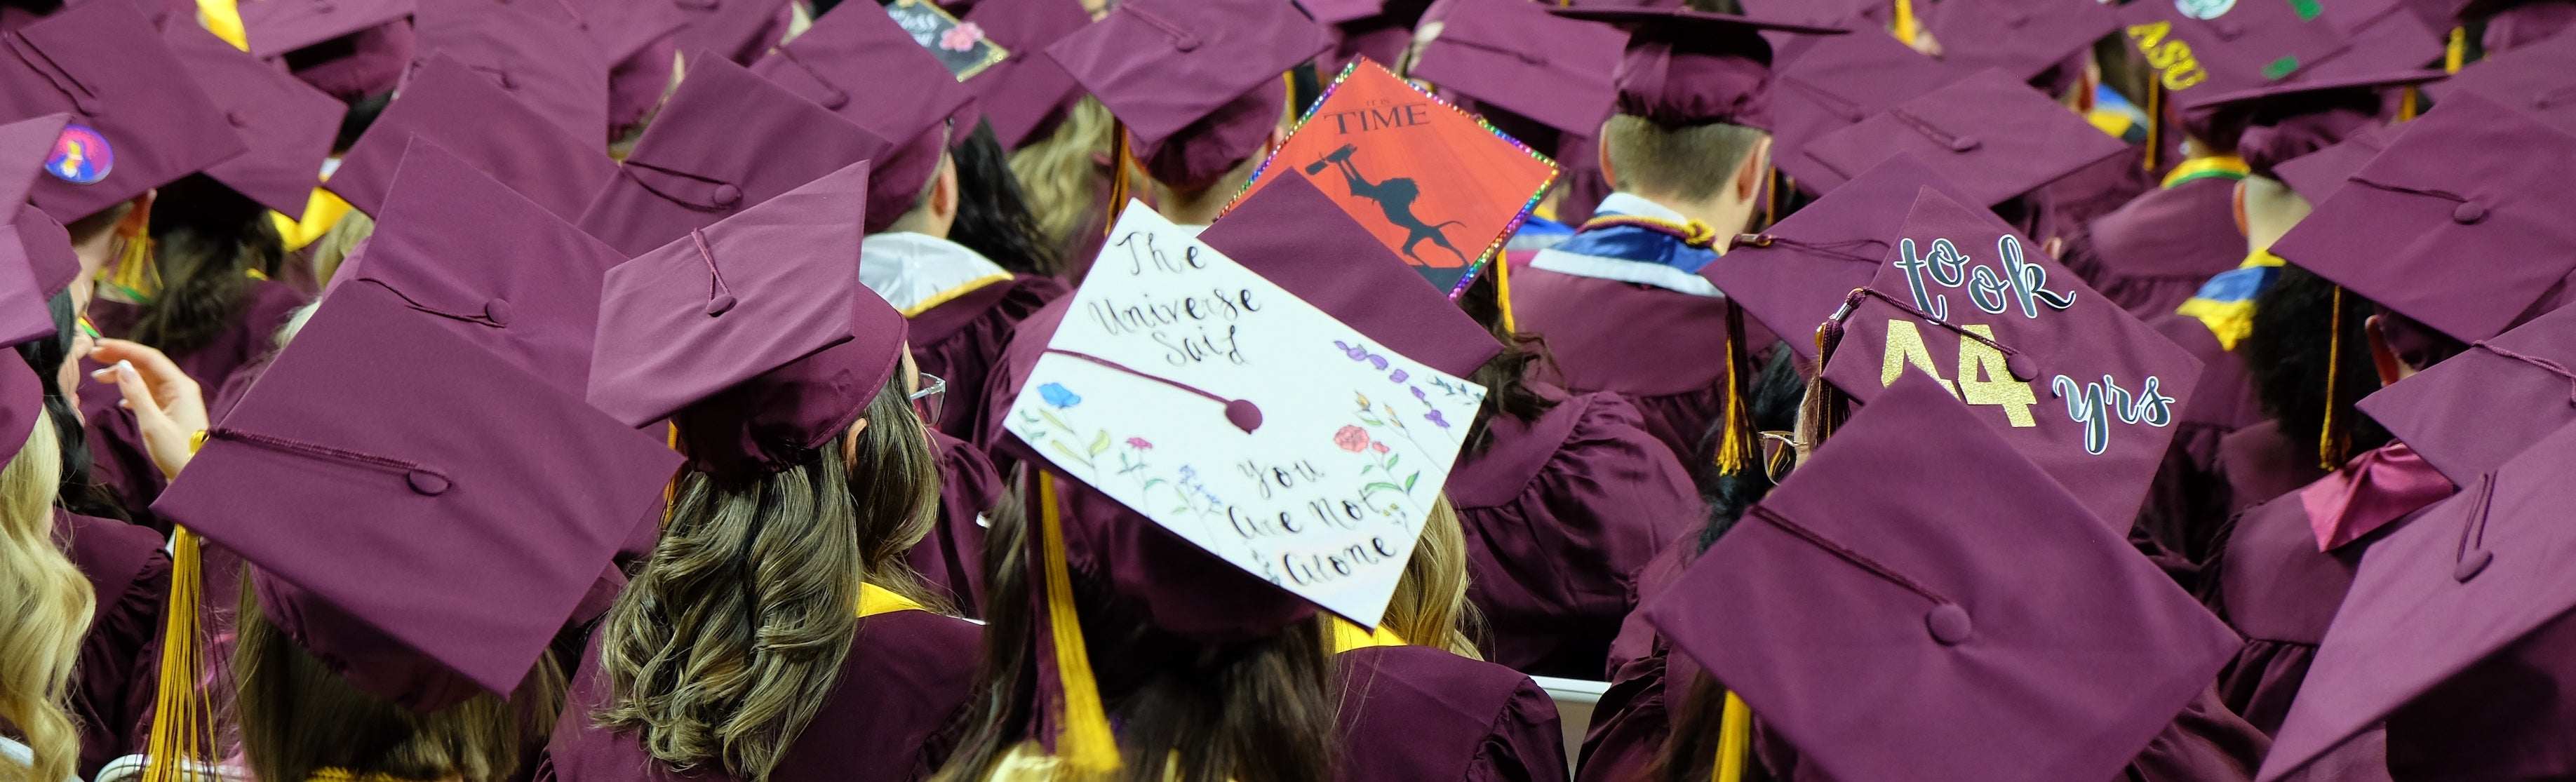 Rearview of new graduates at a graduation ceremony wearing maroon